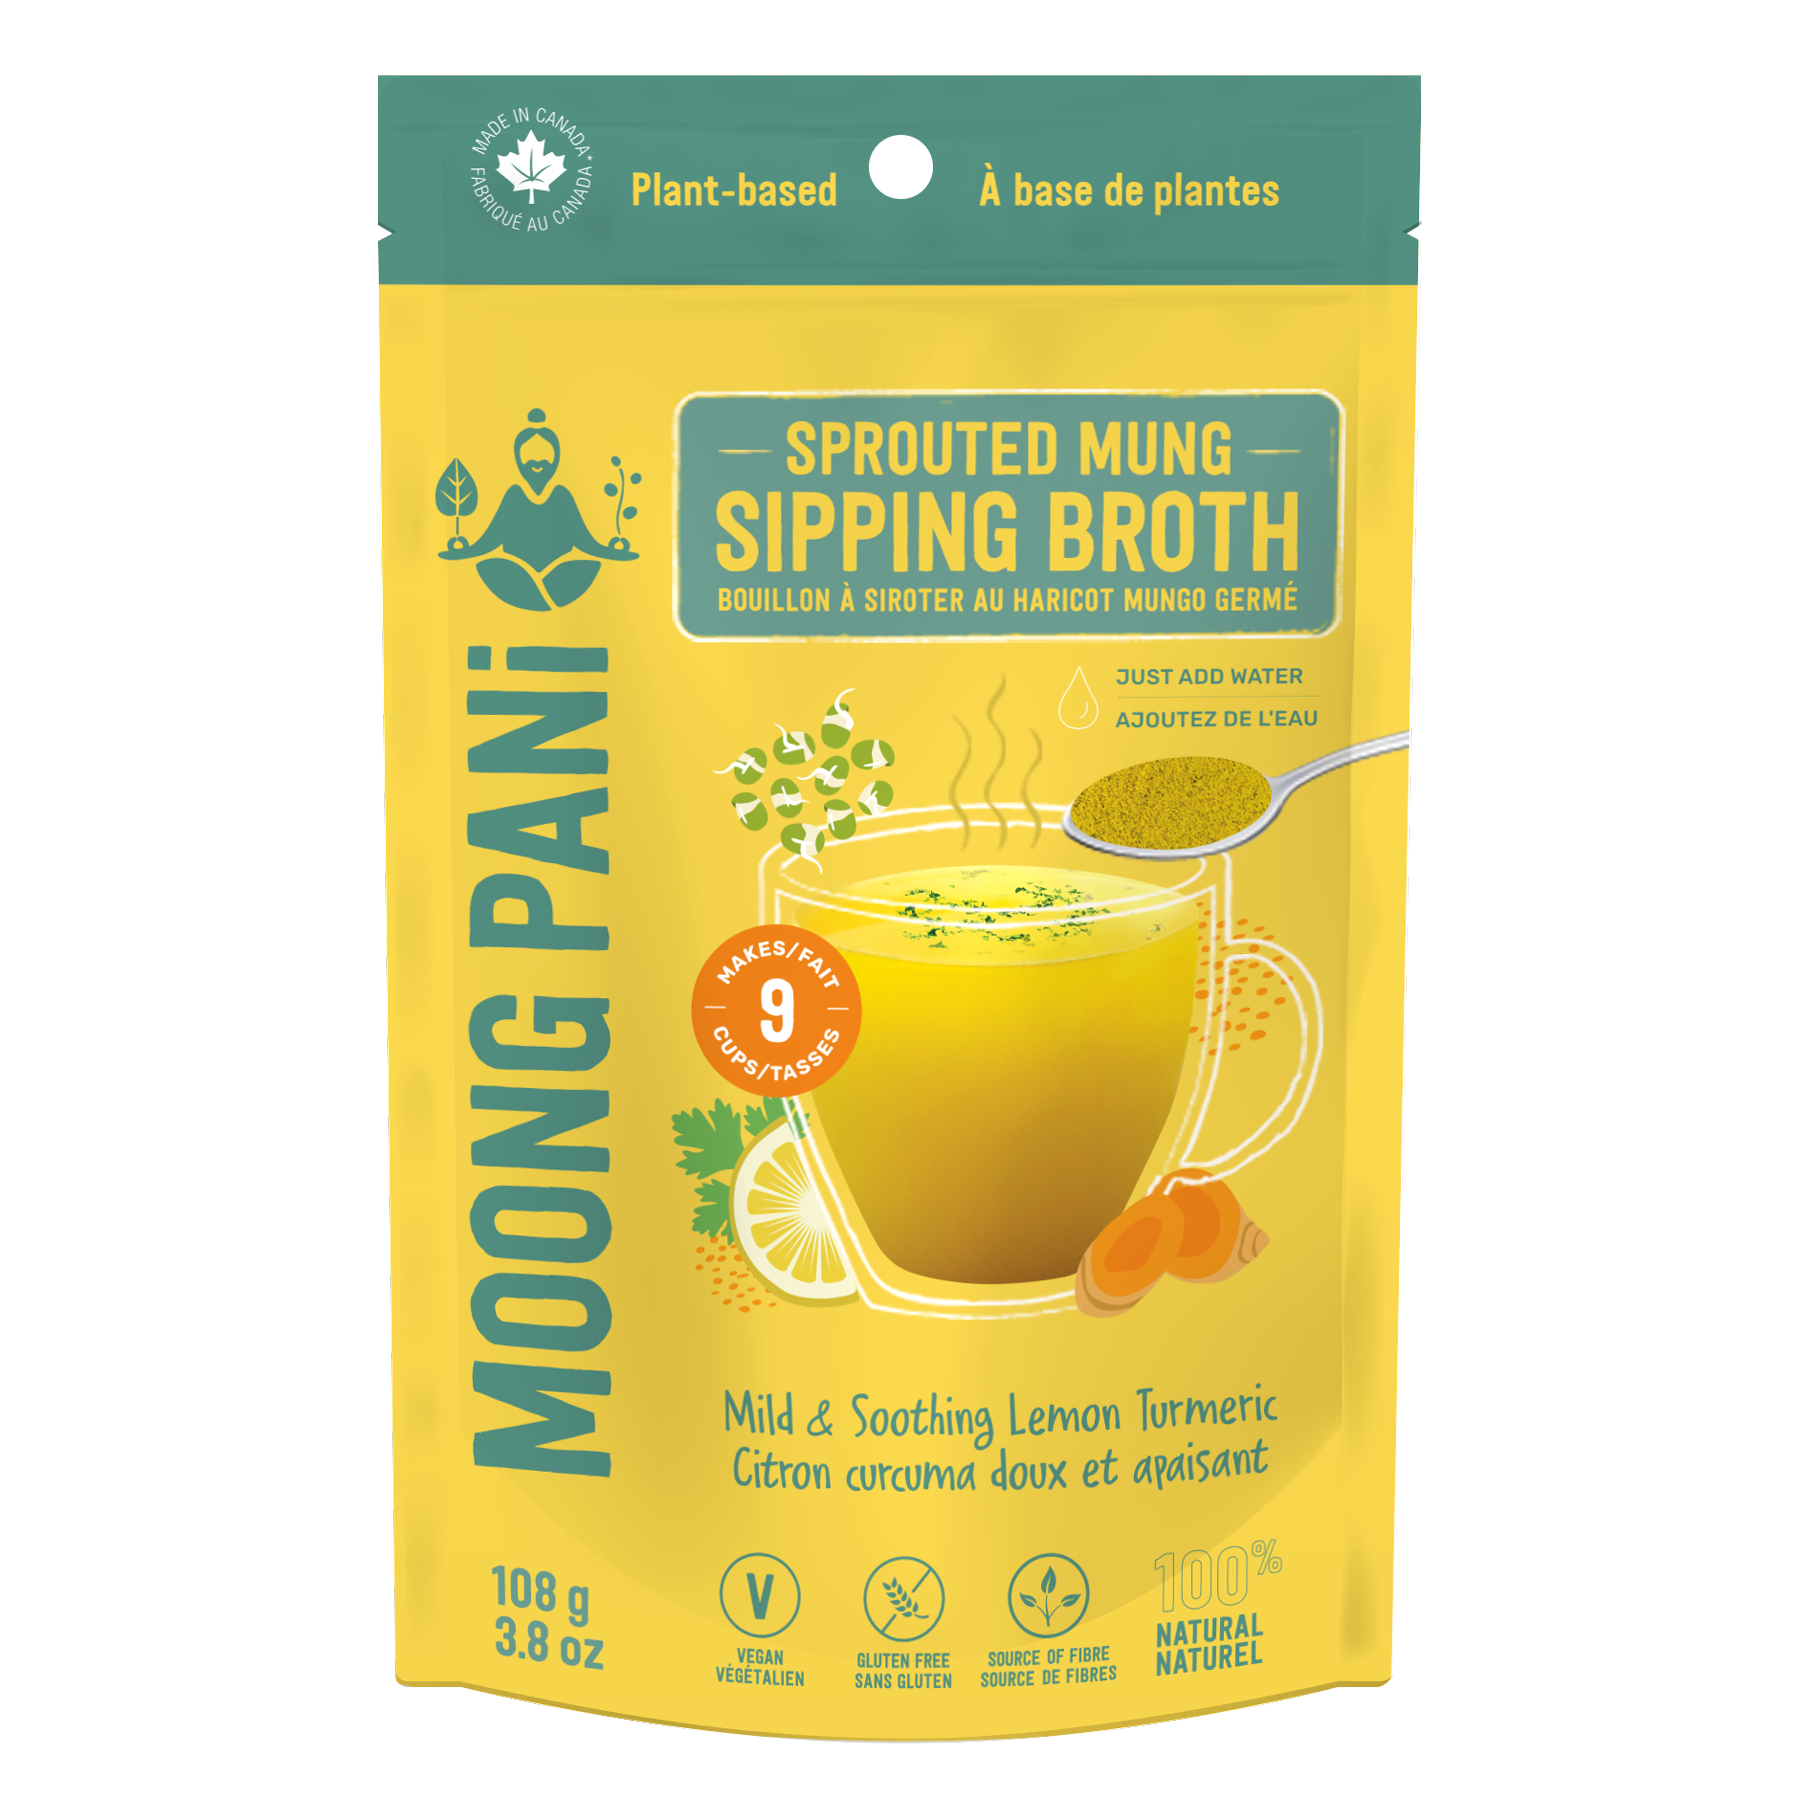 Lemon &amp; Turmeric, Mild and Soothing Sprouted Mung Broth - 9 servings